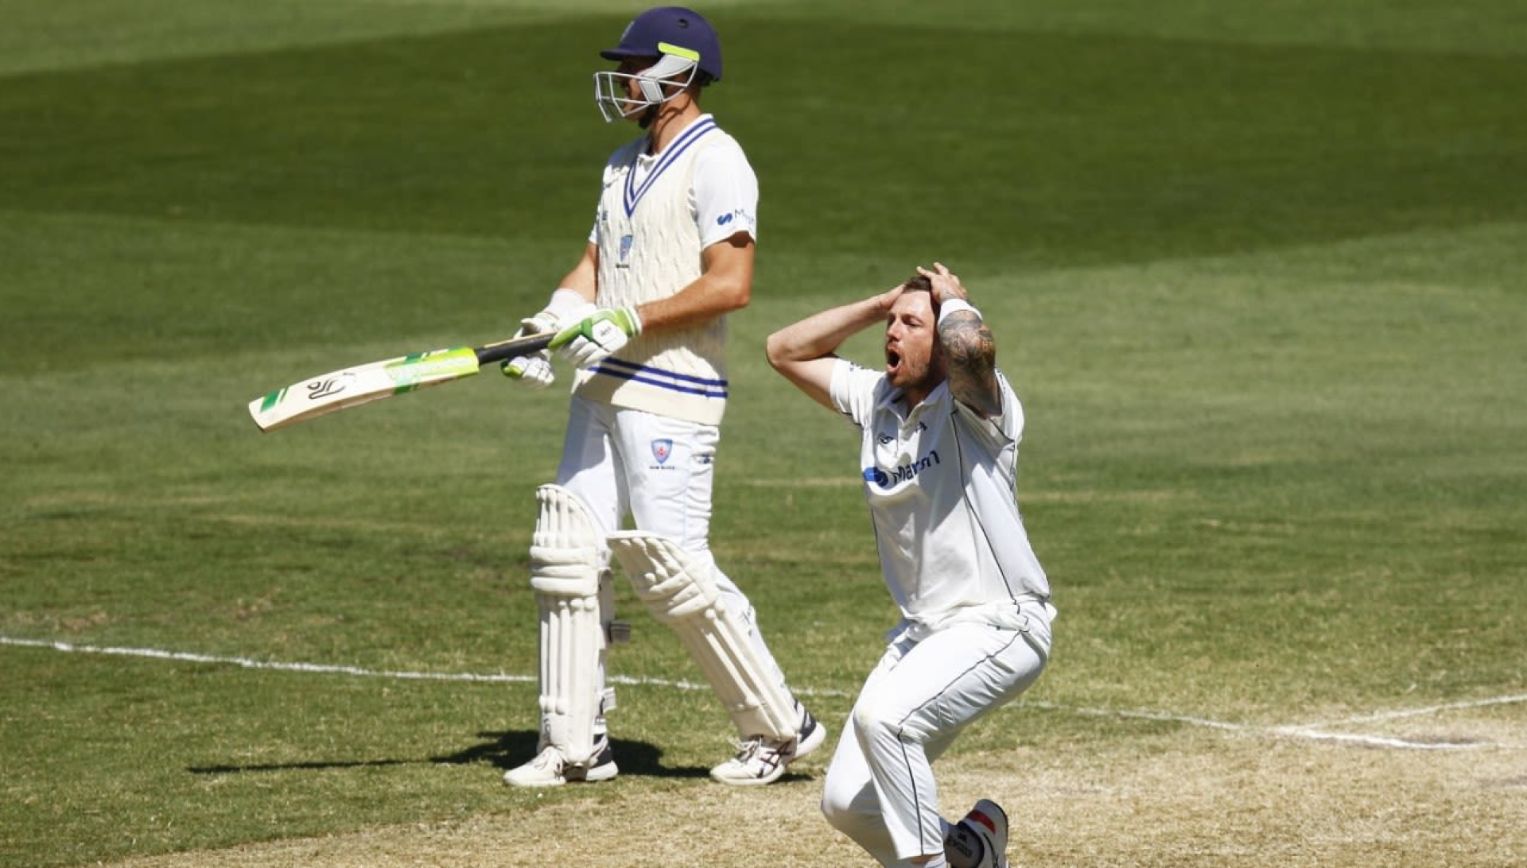 Watch: James Pattinson dangerously hurls ball at Daniel Hughes in follow-through, gets suspended